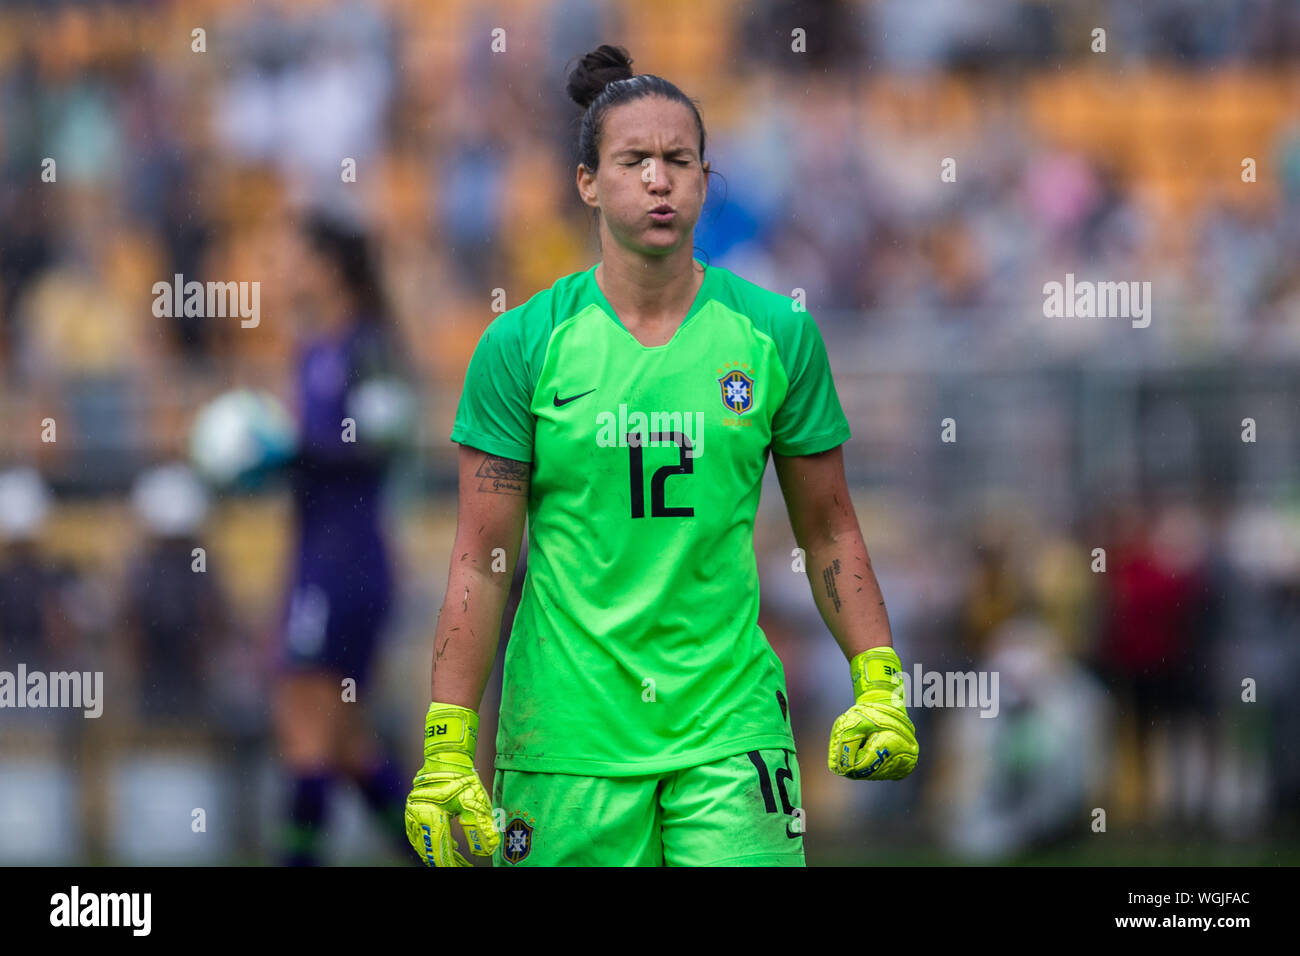 SÃO PAULO, SP - 01.09.2019: BRAZIL X CHILE - Brazil goalkeeper Aline Reis, even with perfect performance in the penalty shootout, could not guarantee the victory of Brazil. Uber Women'ccer Cup Cup - Chilean national team wins the Brazilian women&am9;s soccer team on penalties after a 0-0 dra draw in normal time. With a lot of rain, which disrupted the football of both teams, and with audience of 15,047 paying and income of $ 174,073.00. The match took place this Sunday, September 1st, 2019, at Pacaembu Stadium, in São Paulo. (Photo: Van Campos/Fotoarena) Stock Photo